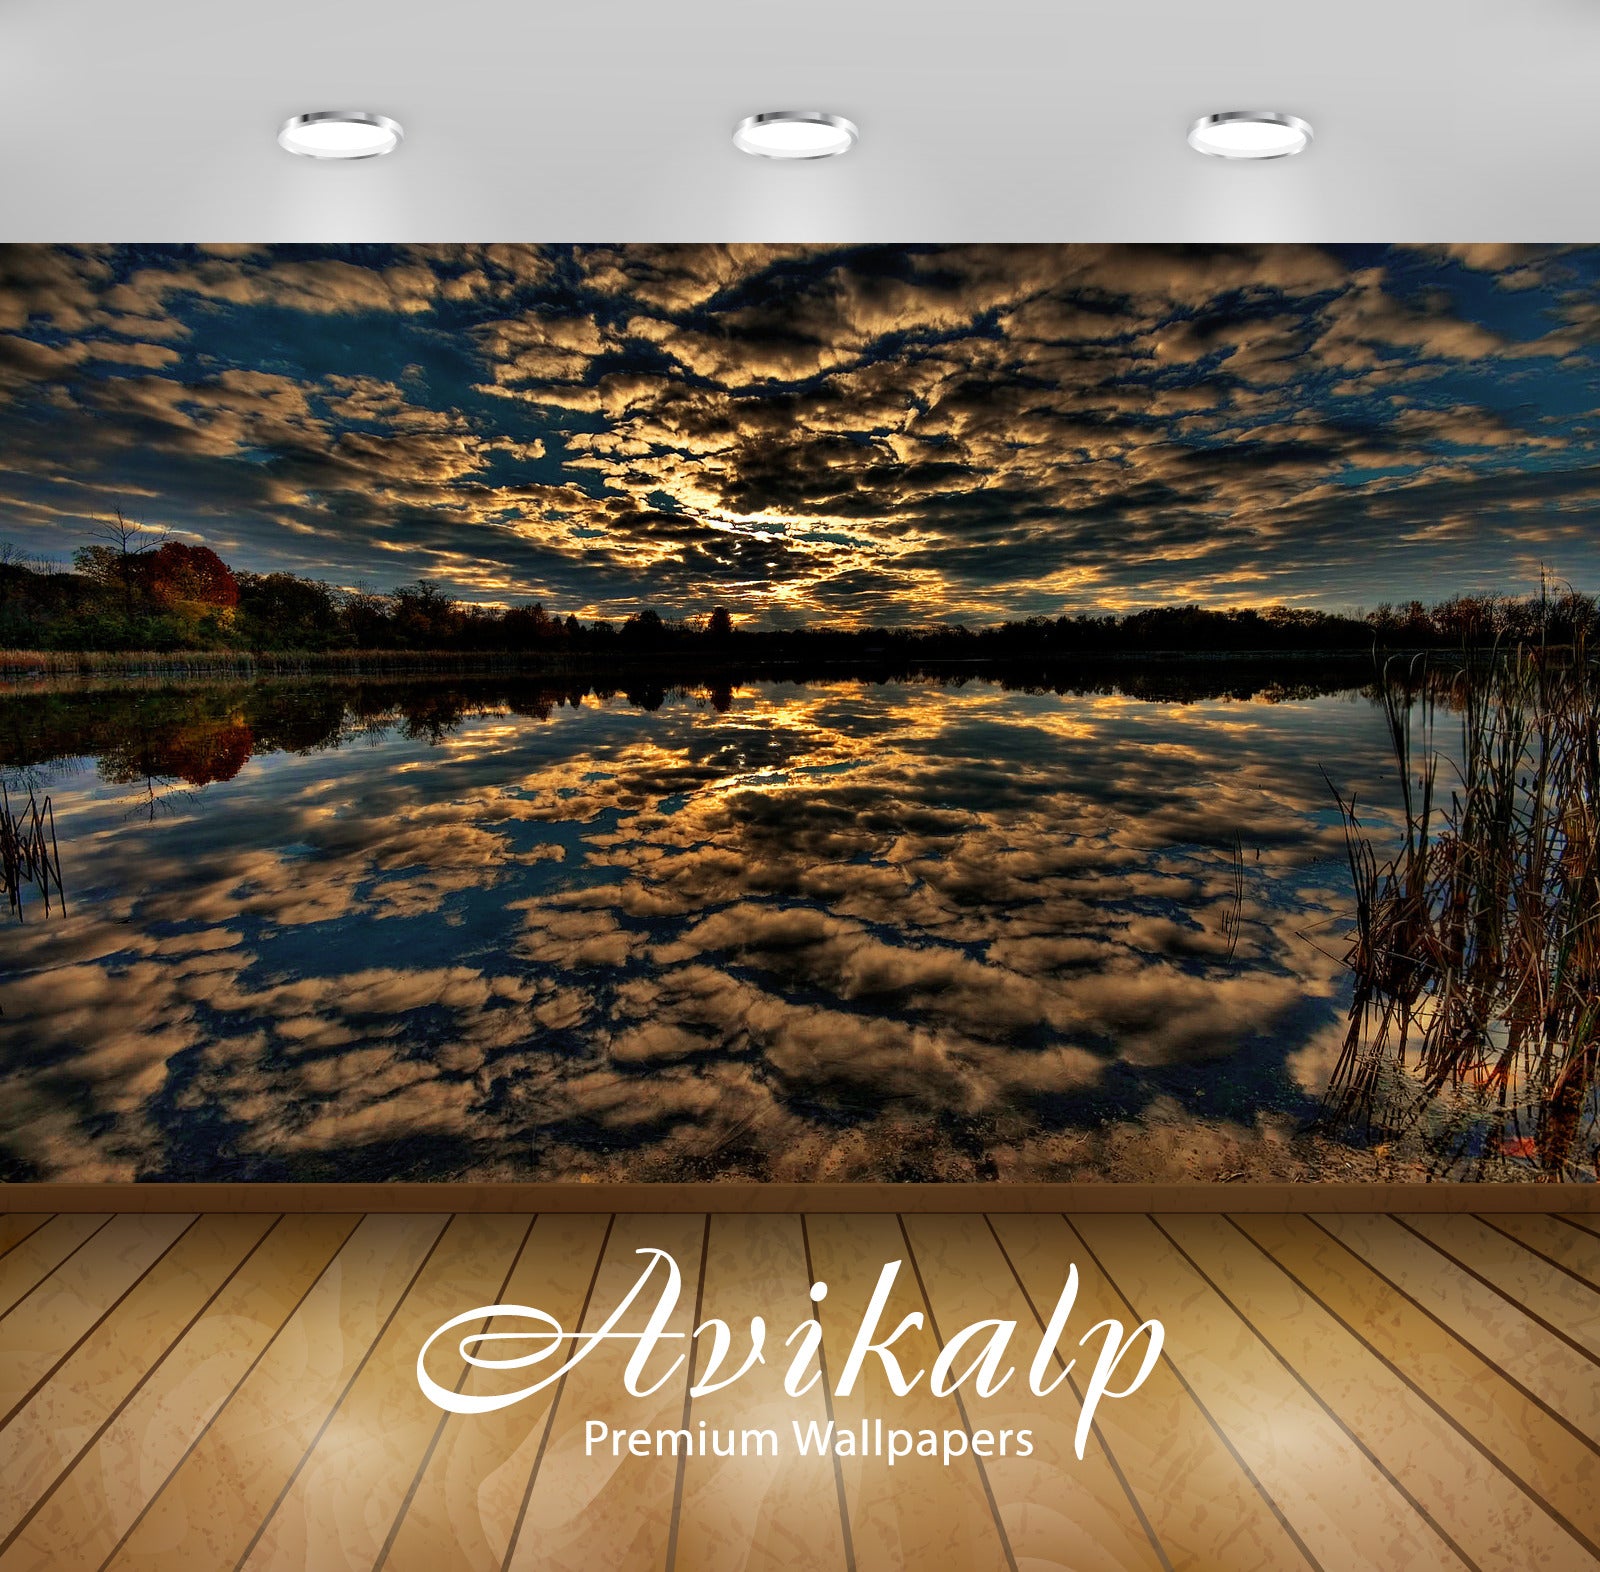 Avikalp Exclusive Awi1679 Magic Sunset Full HD Wallpapers for Living room, Hall, Kids Room, Kitchen,